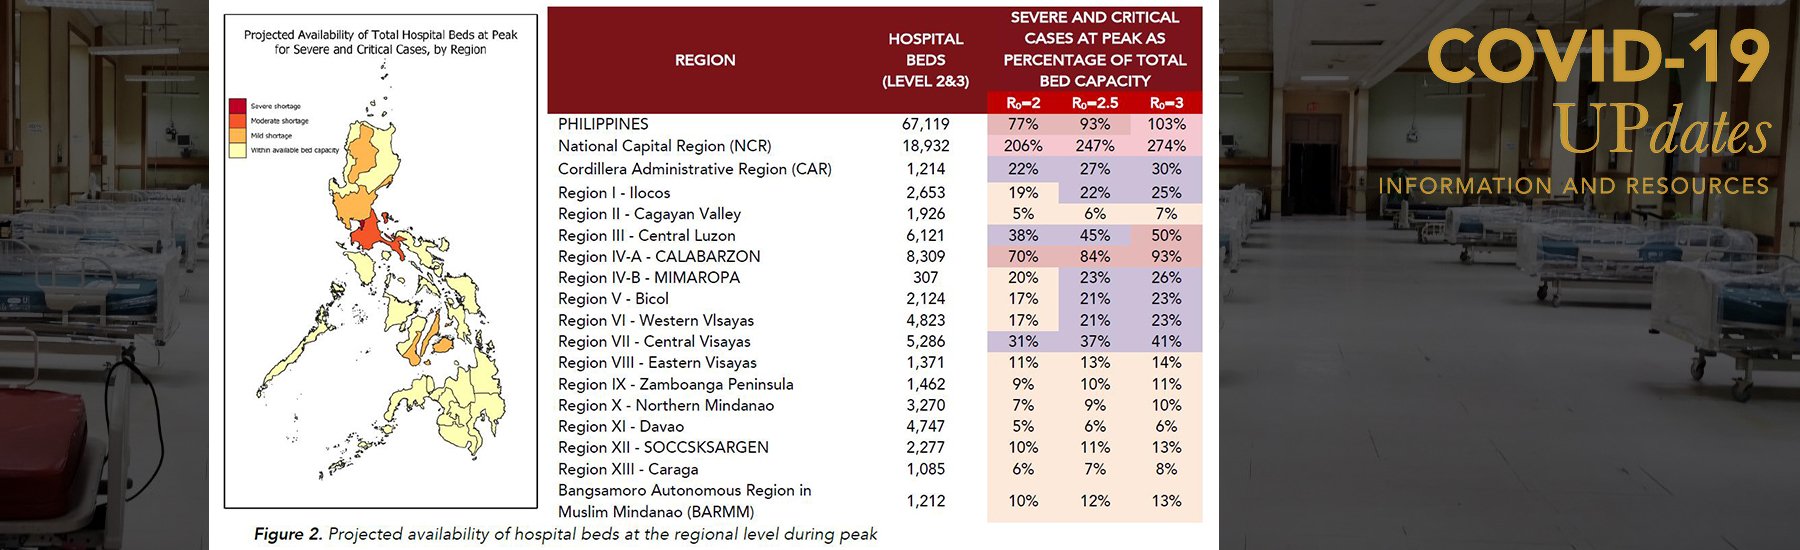 Estimating Local Healthcare Capacity to Deal with COVID-19 Case Surge: Analysis and Recommendations